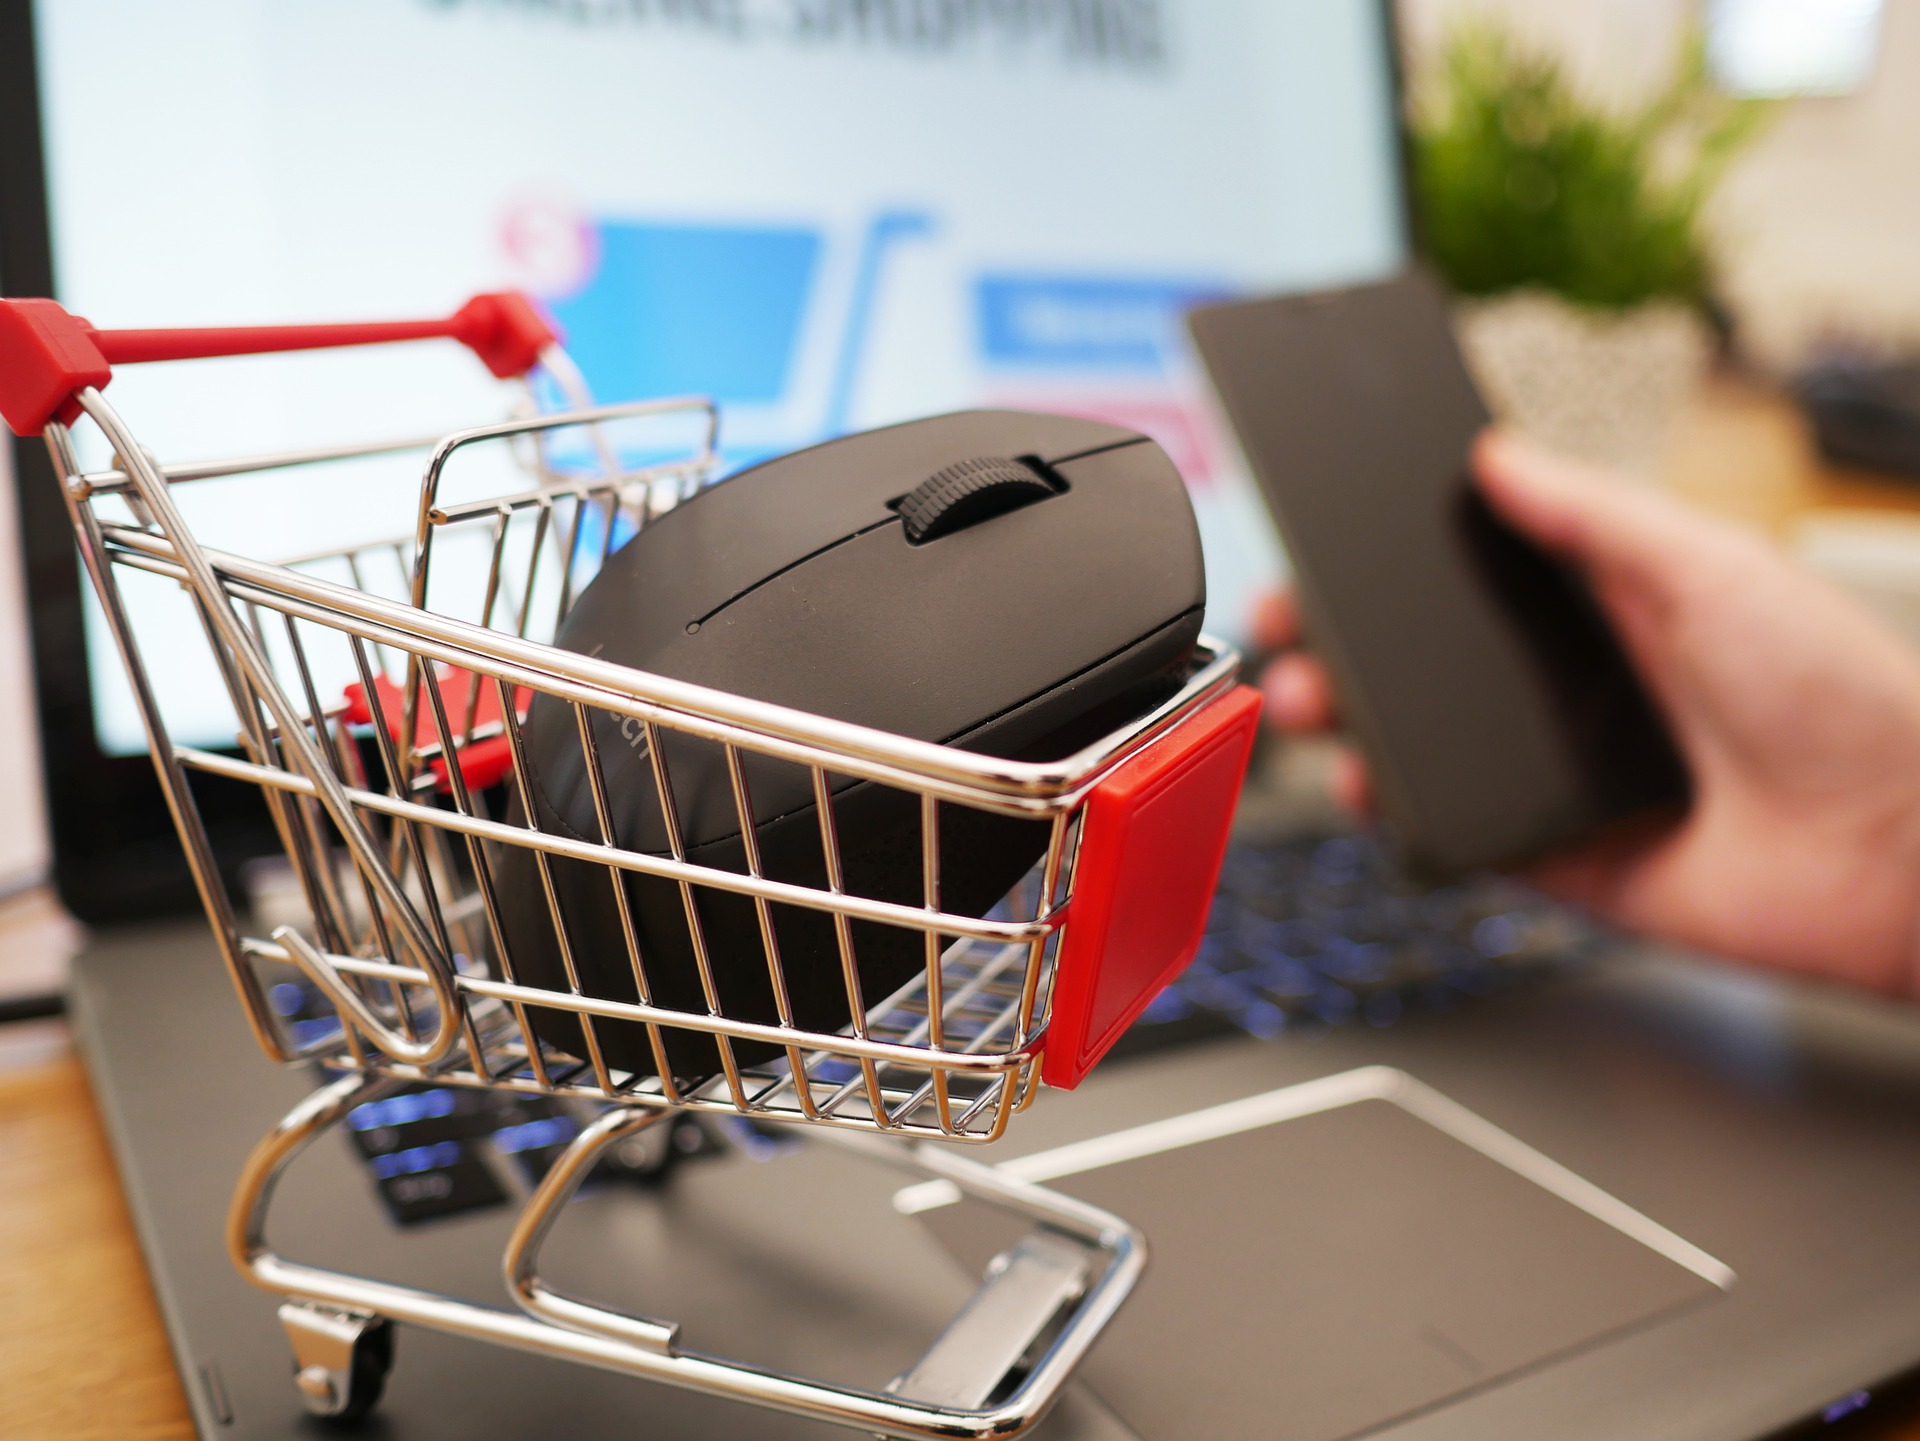 Smarter online shopping: get the best deals, prices and protect data